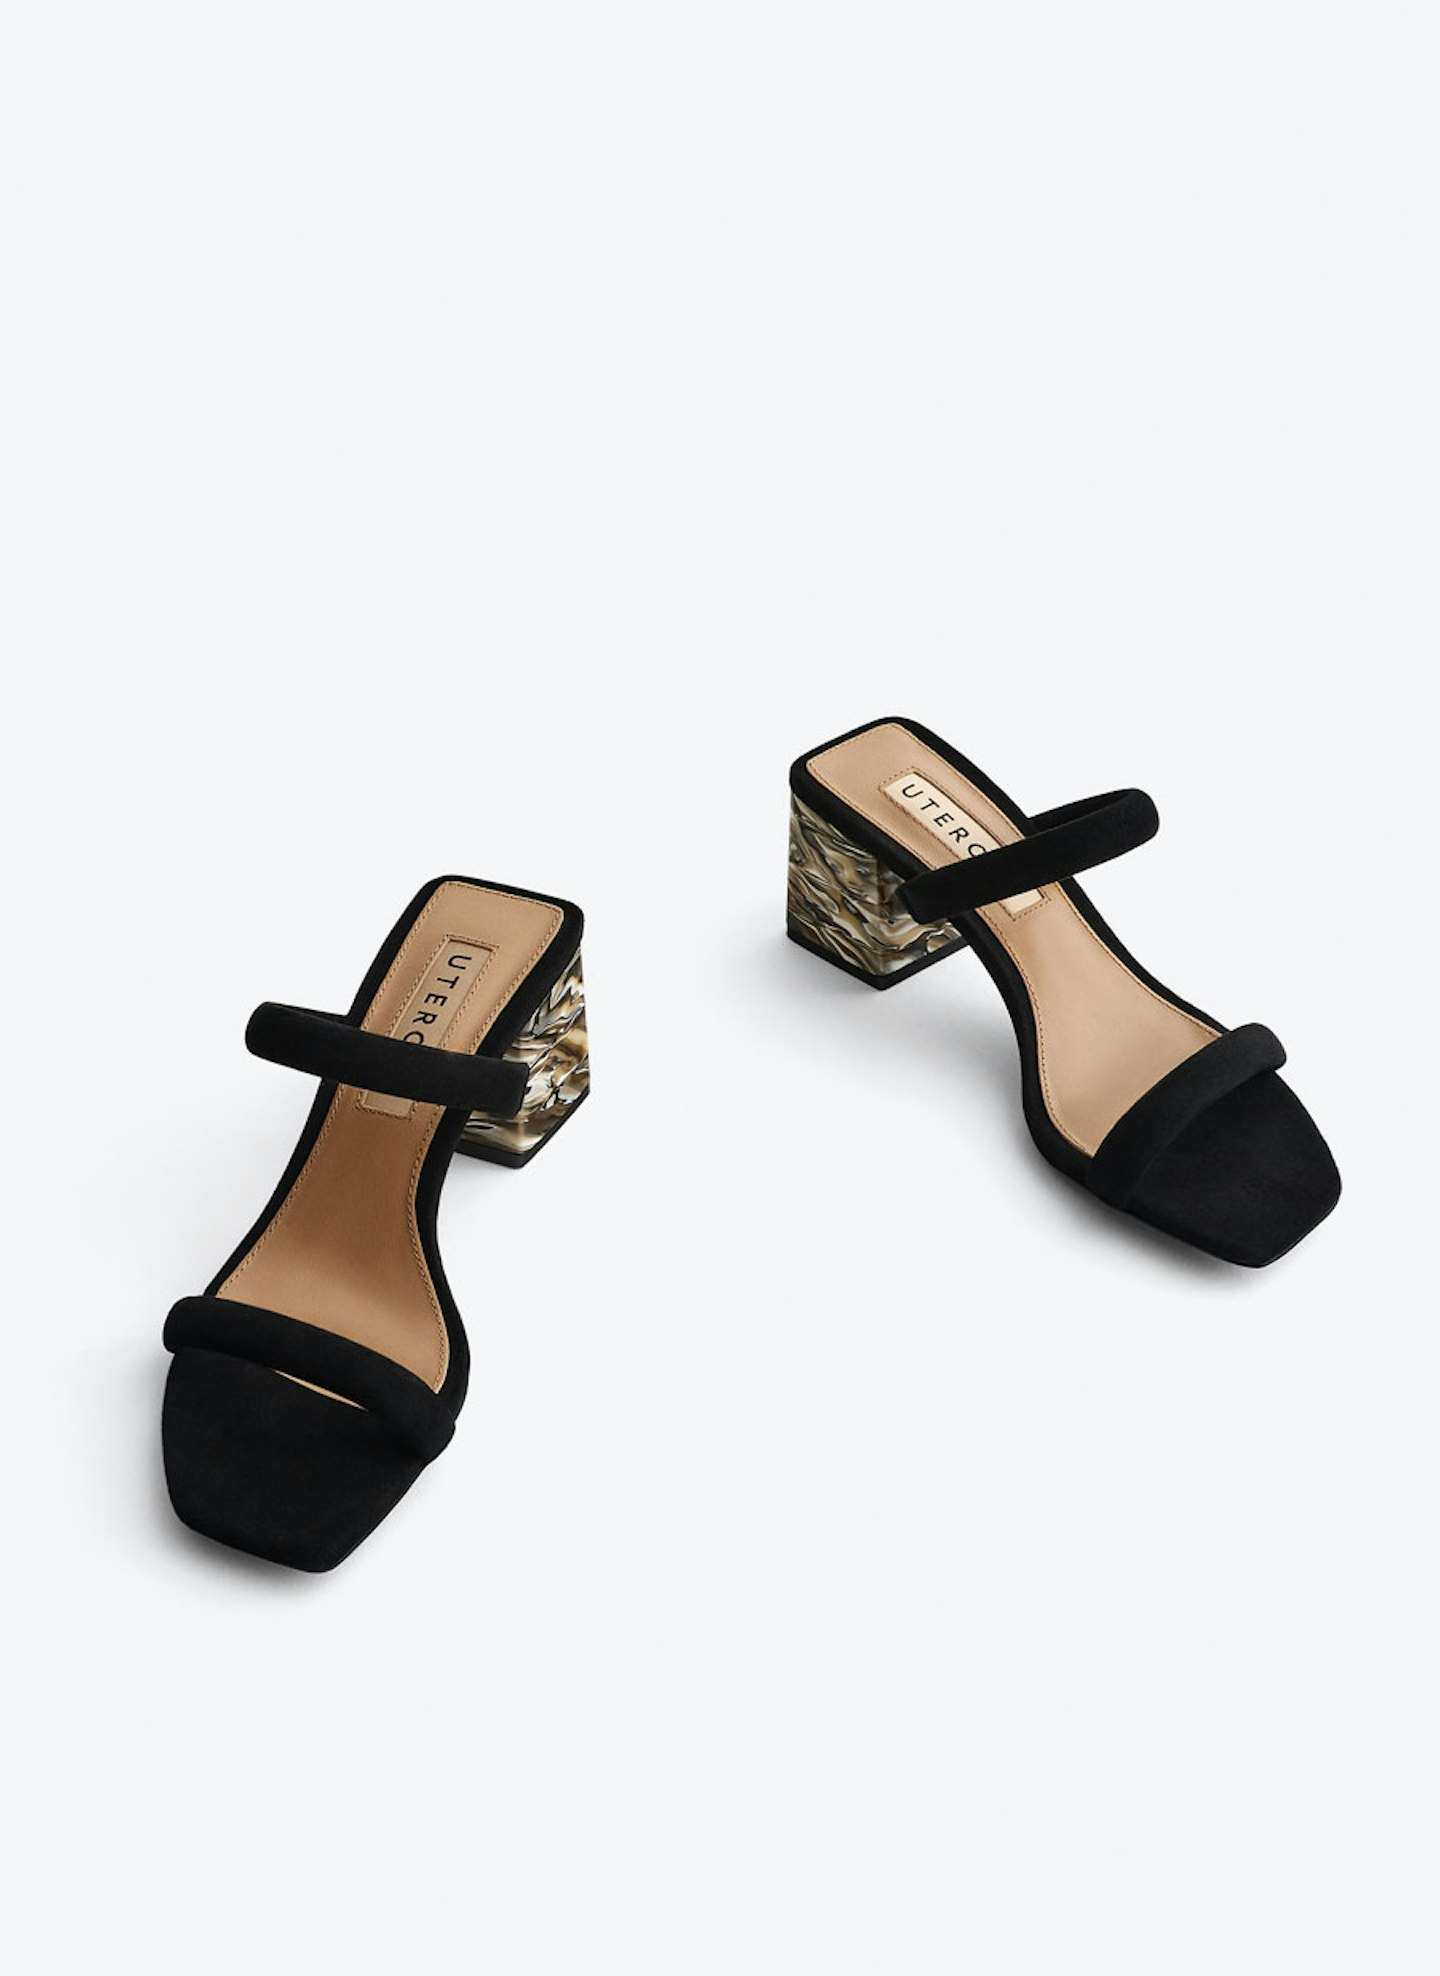 Uterqu00fce, Suede Sandals with Marble Effect Heels, £99